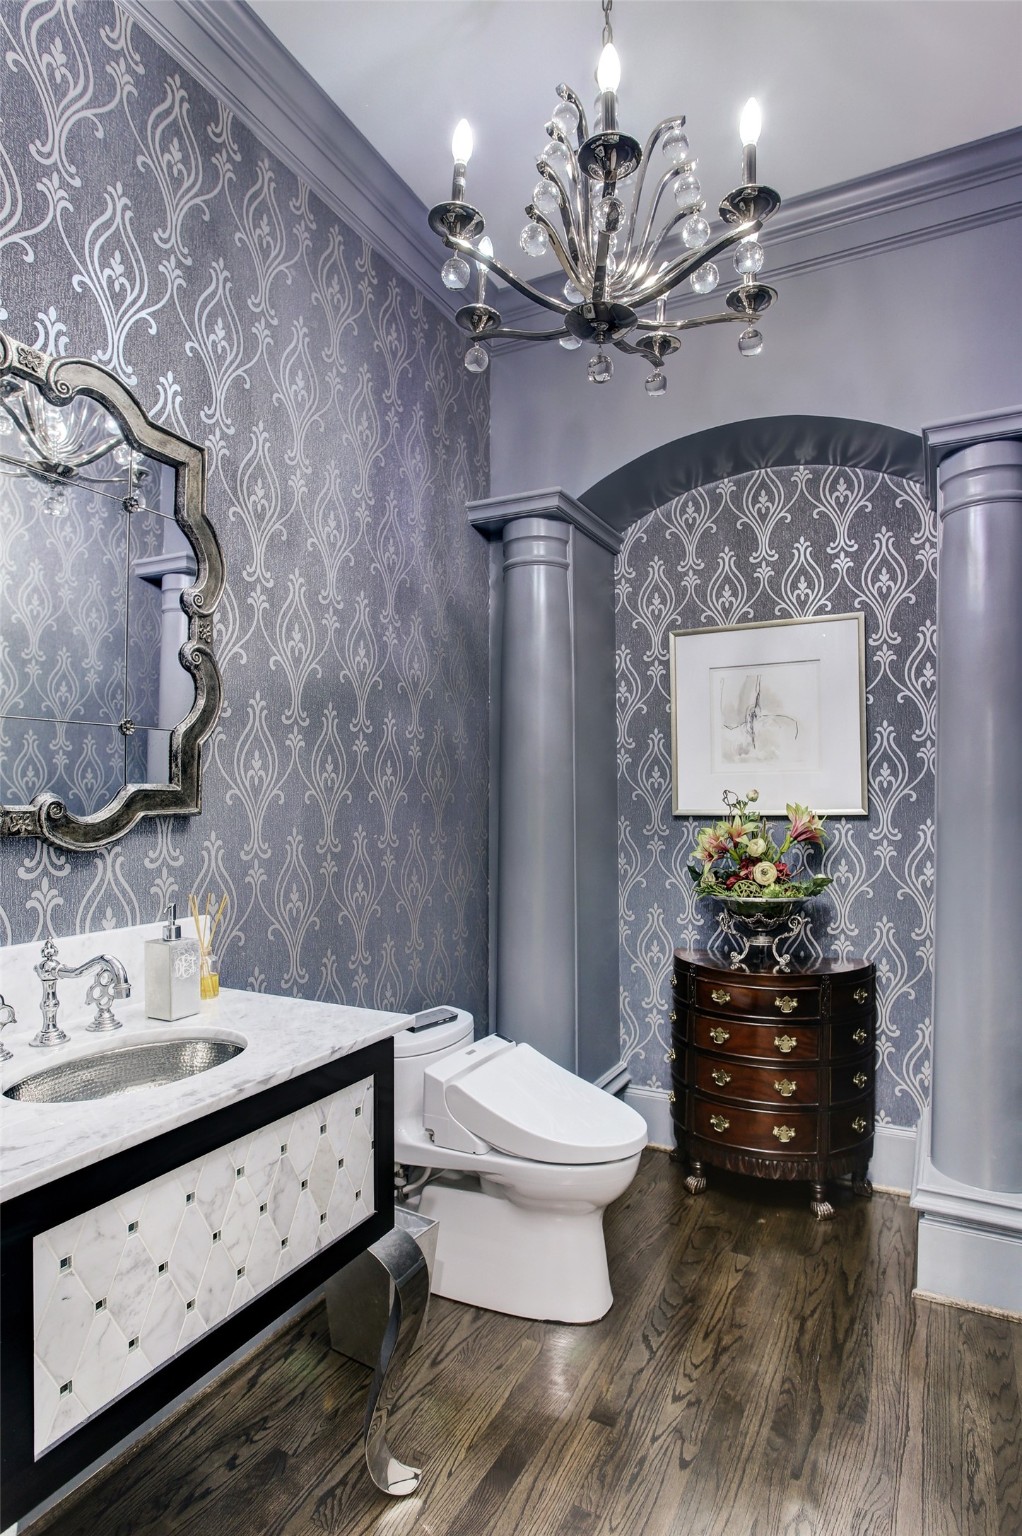 The guest bathroom, with custom vanity, sink, counter and Toto toilet, is consistent with the elegant style found throughout this home.